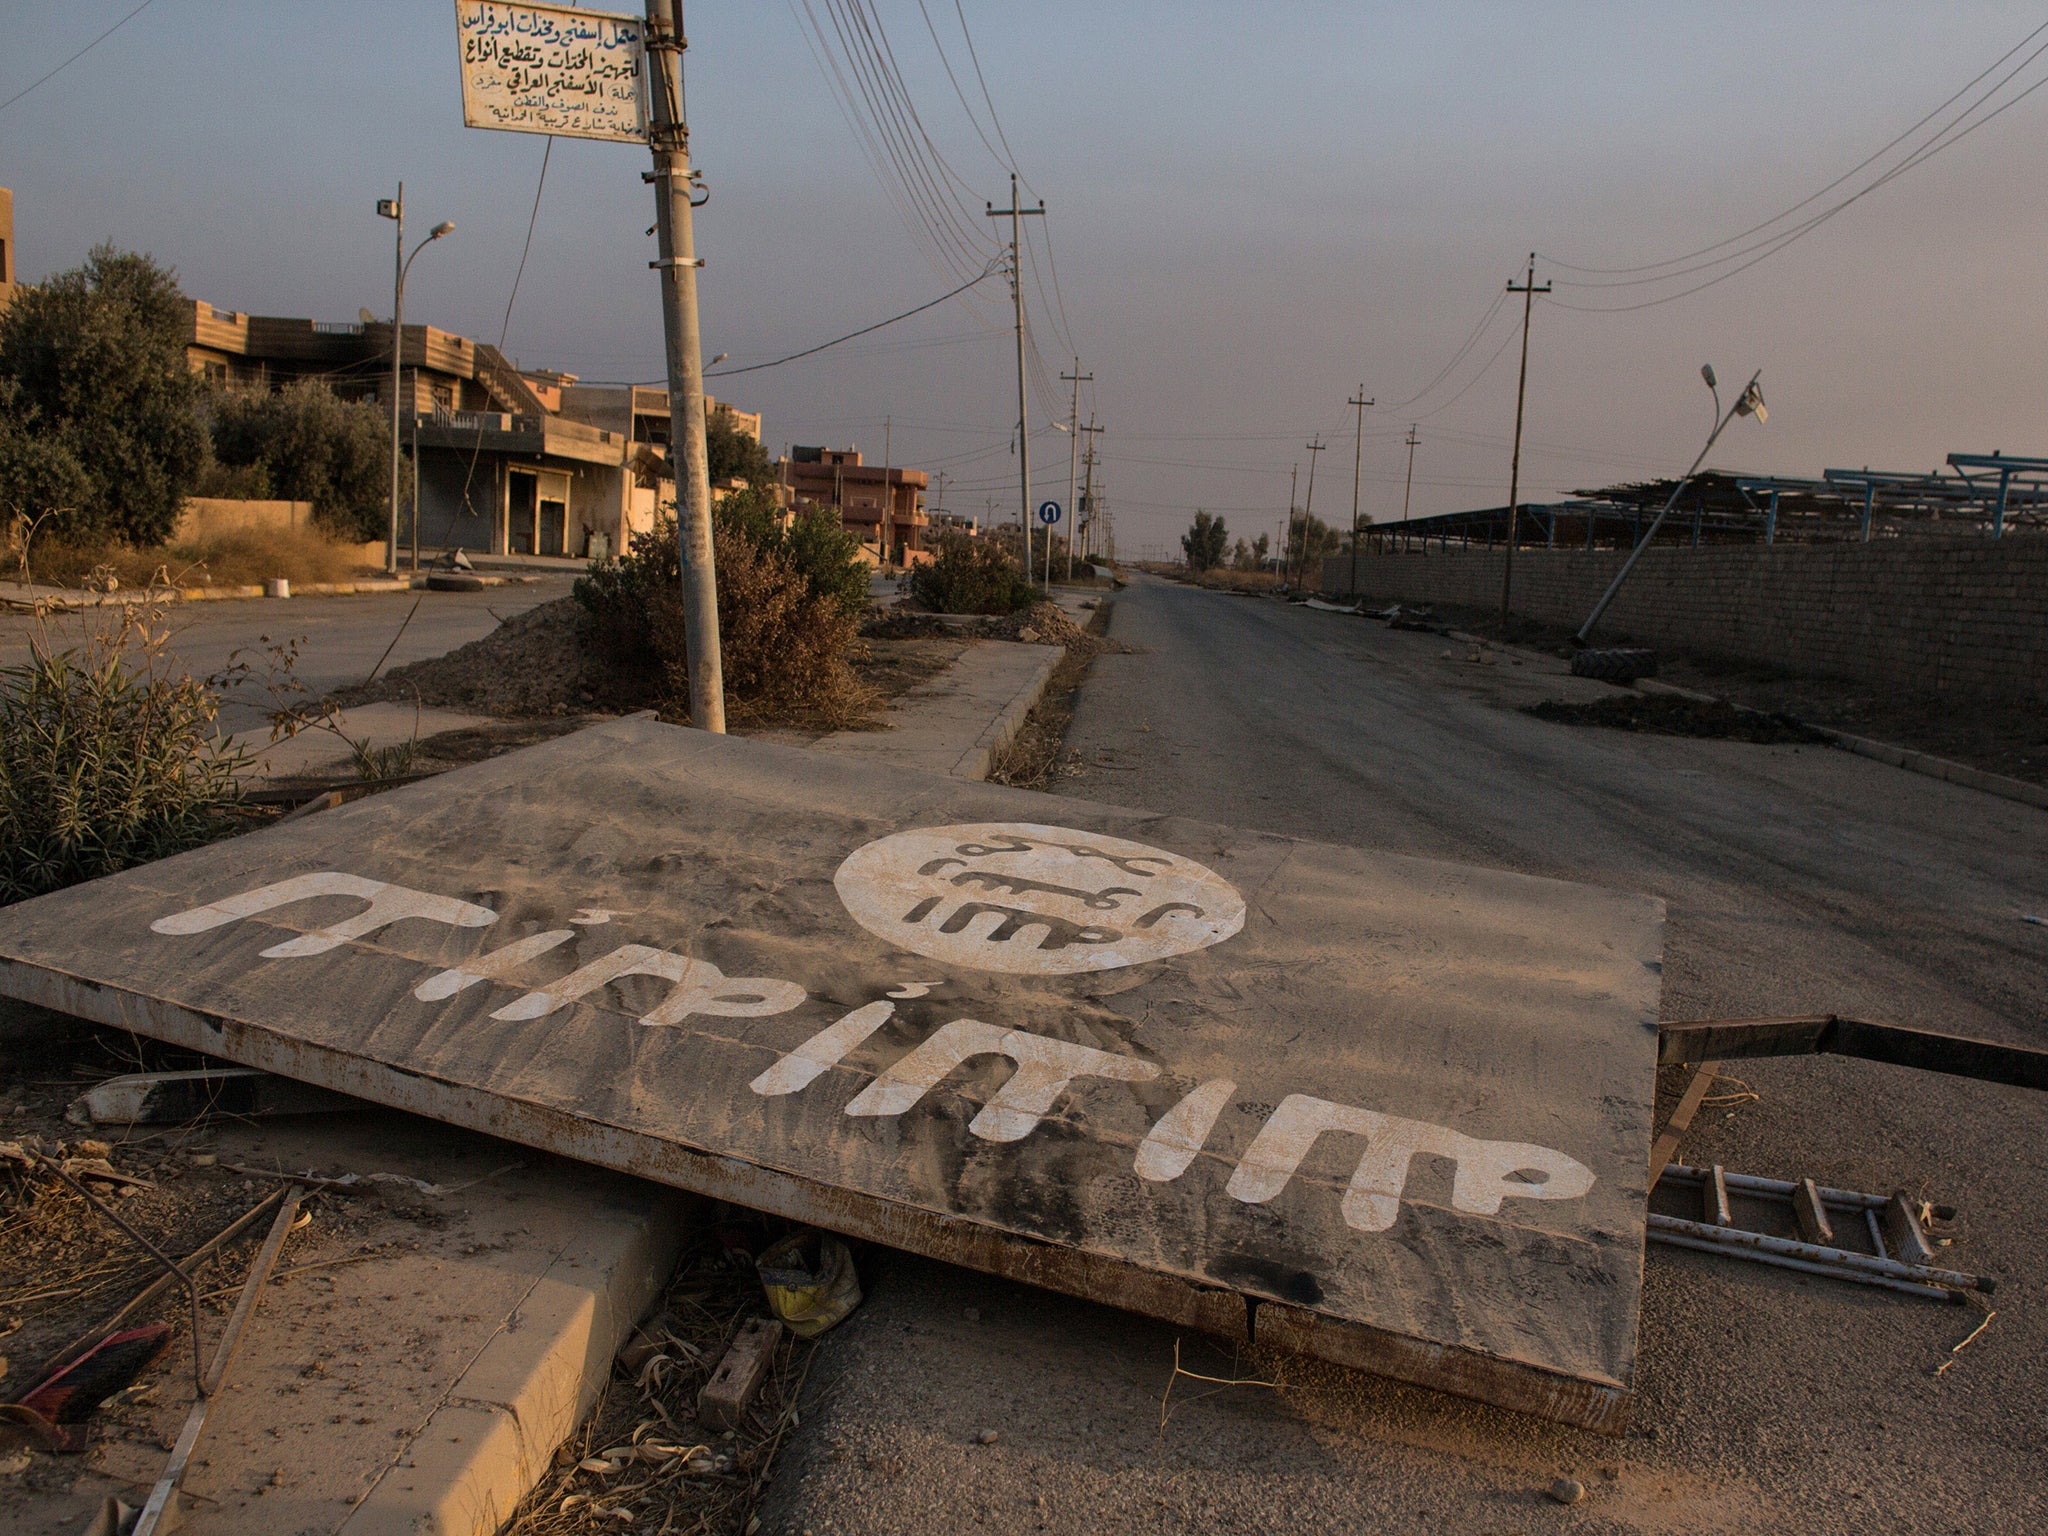 After the fall: an Isis billboard lies destroyed in the middle of the road